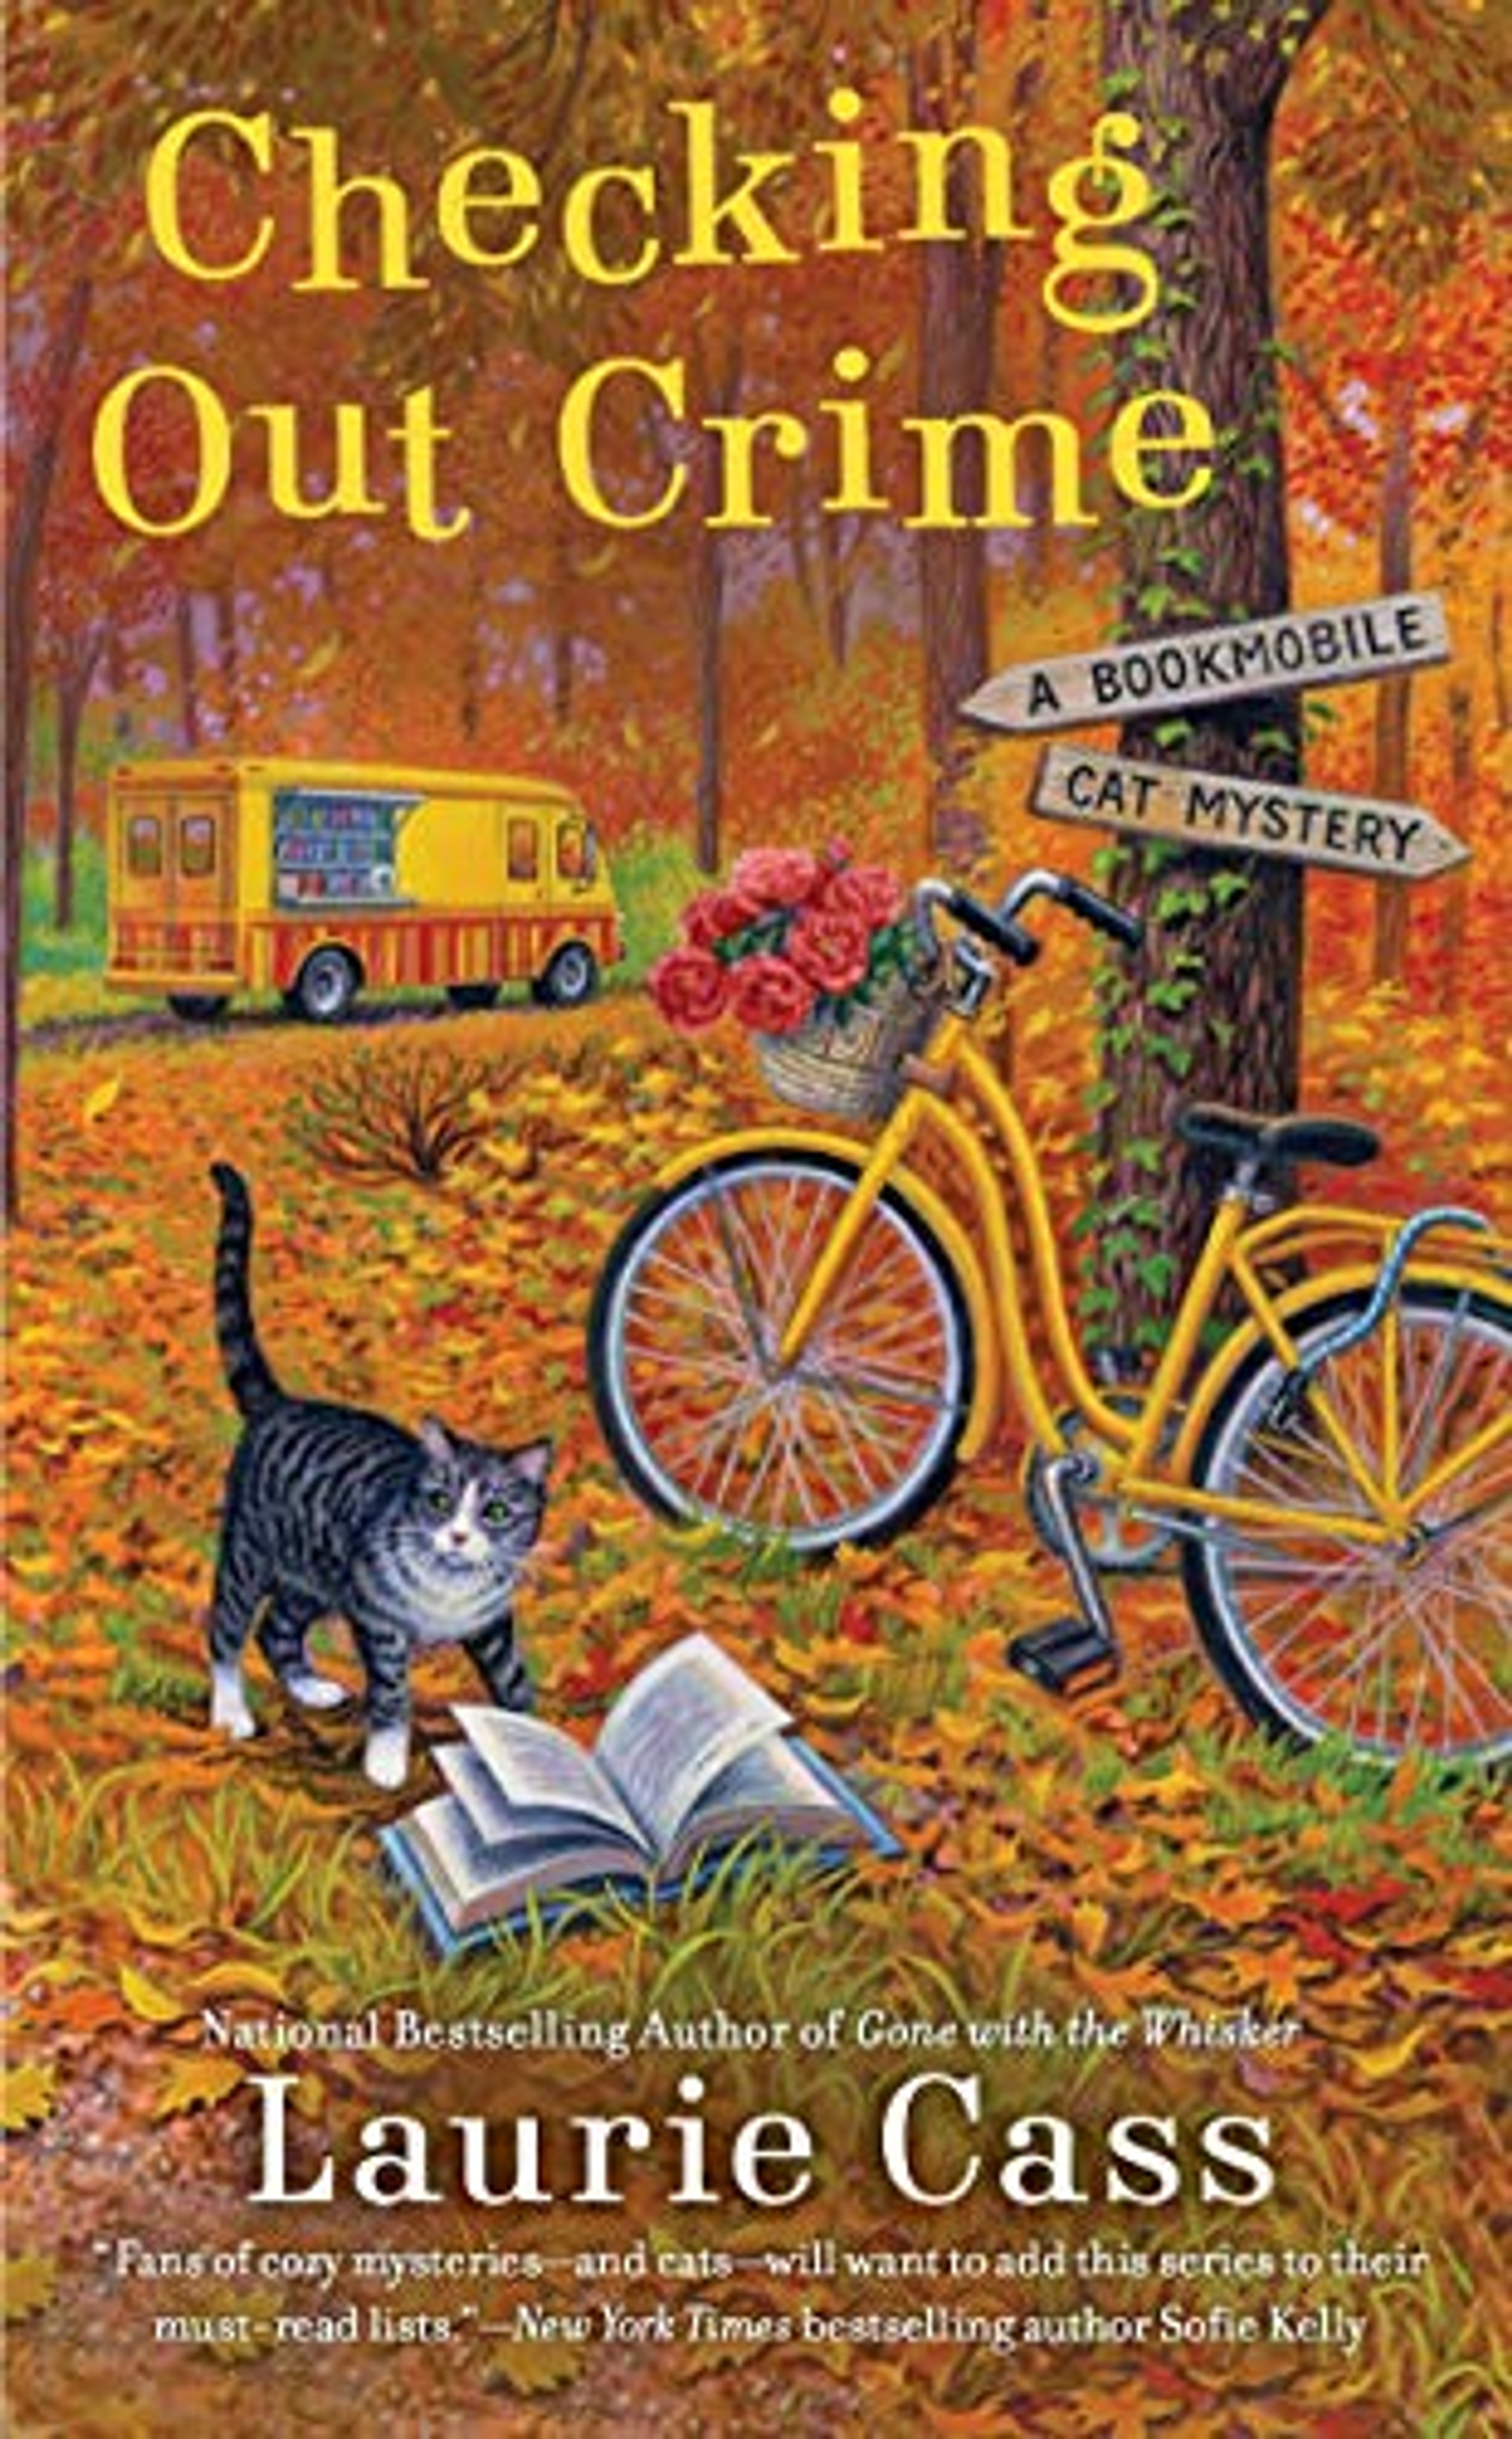 Checking Out Crime (A Bookmobile Cat Mystery) Laurie Cass